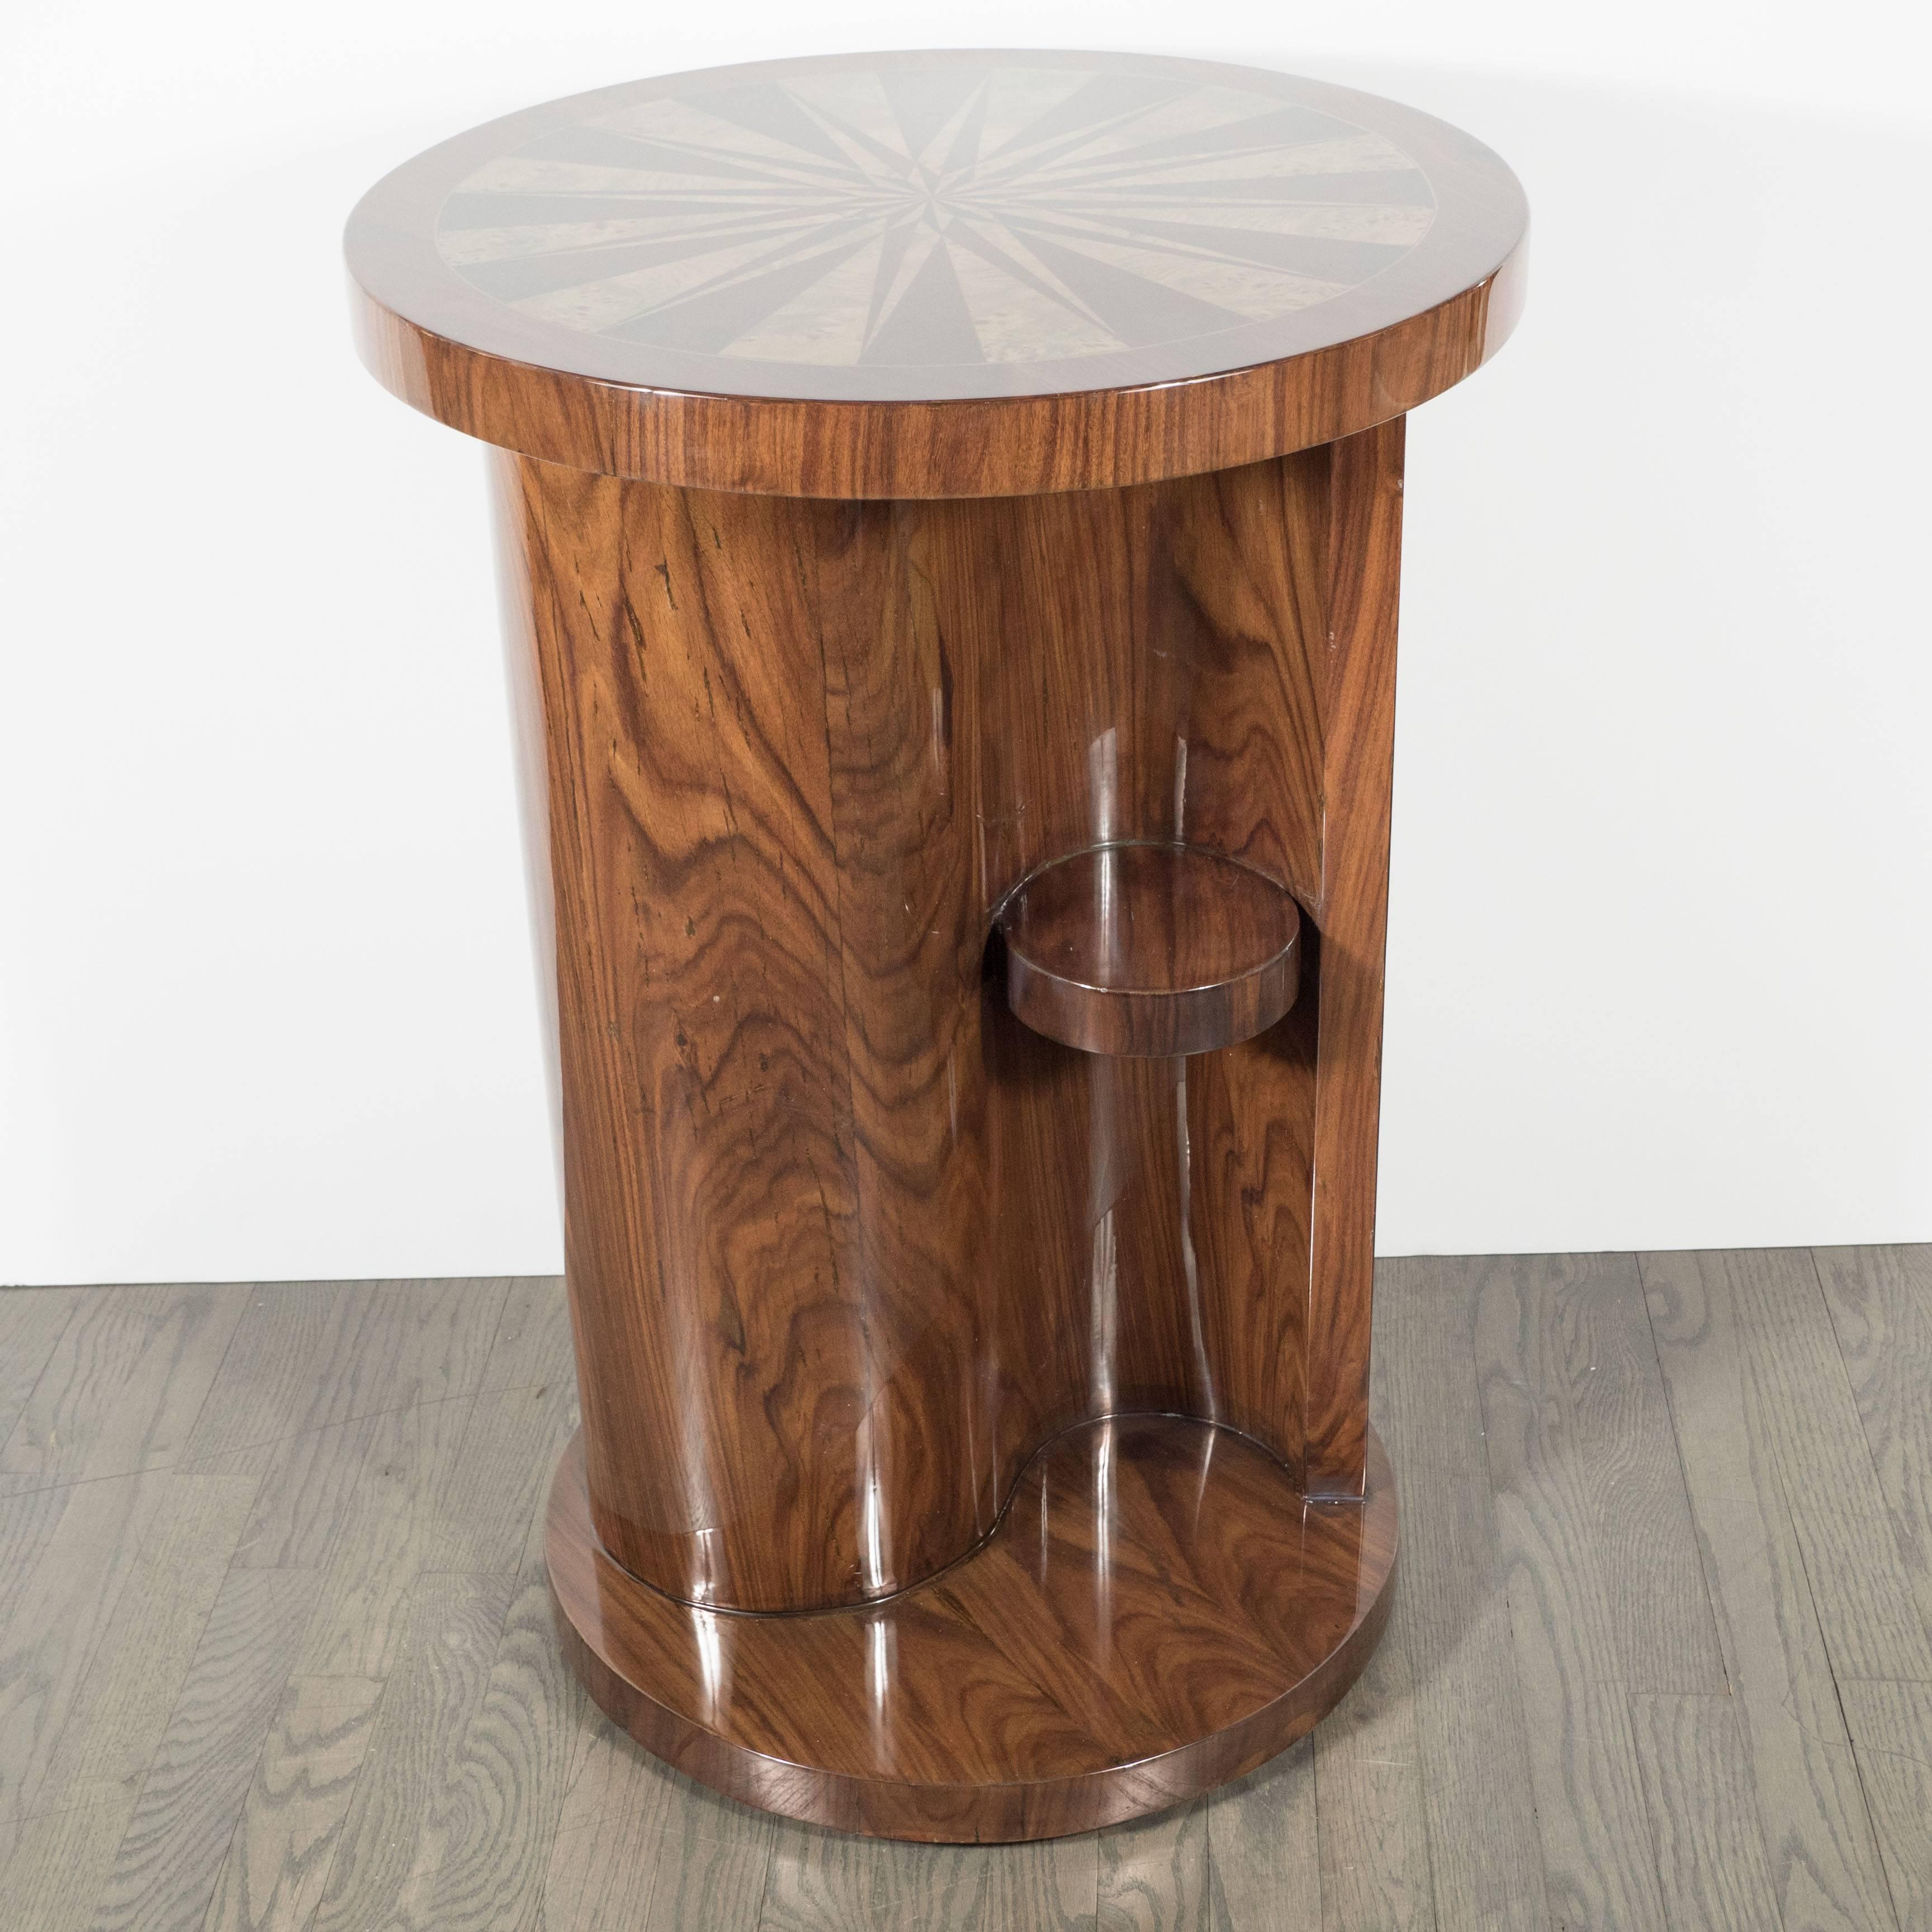 Art Deco Inlaid Starburst Table/ Pedestal in Bookmatched Burled Walnut & Elm For Sale 4